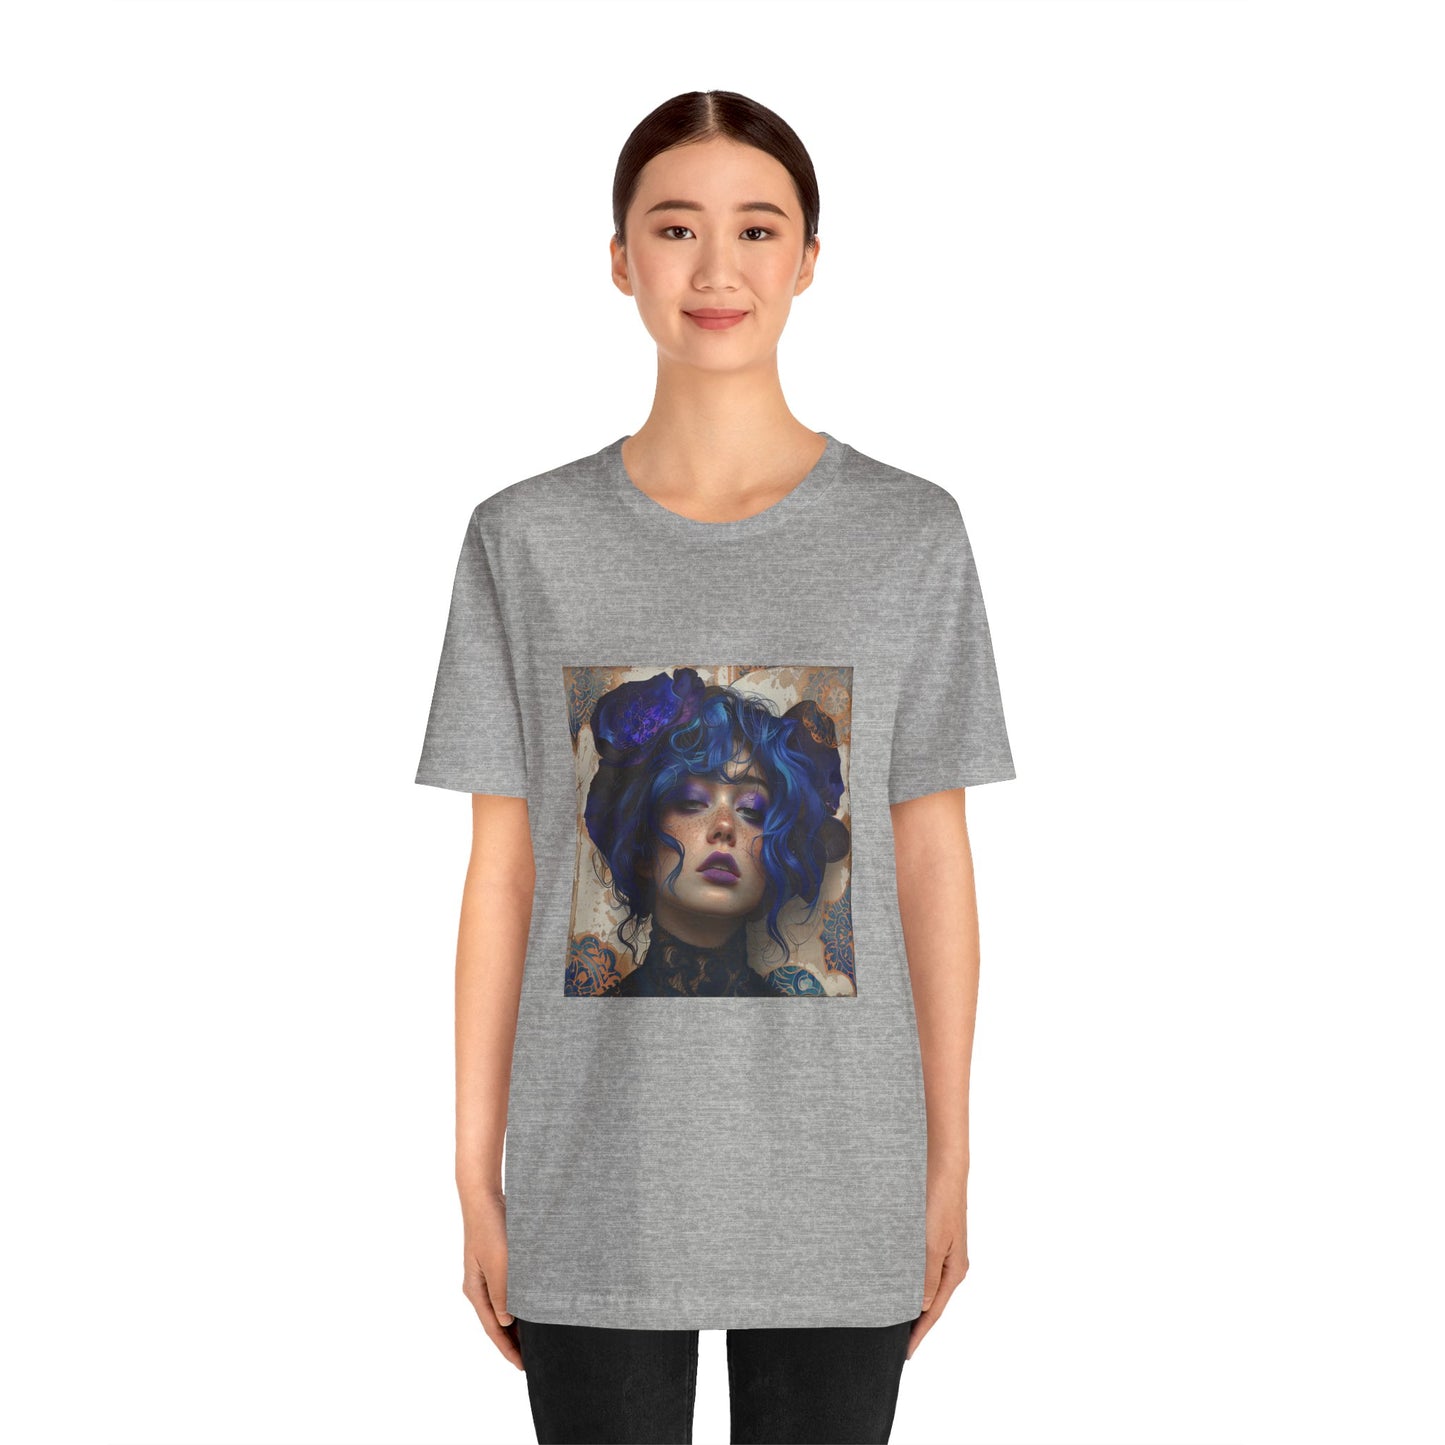 Unisex Jersey Short Sleeve Tee: lady with blue and purple hair